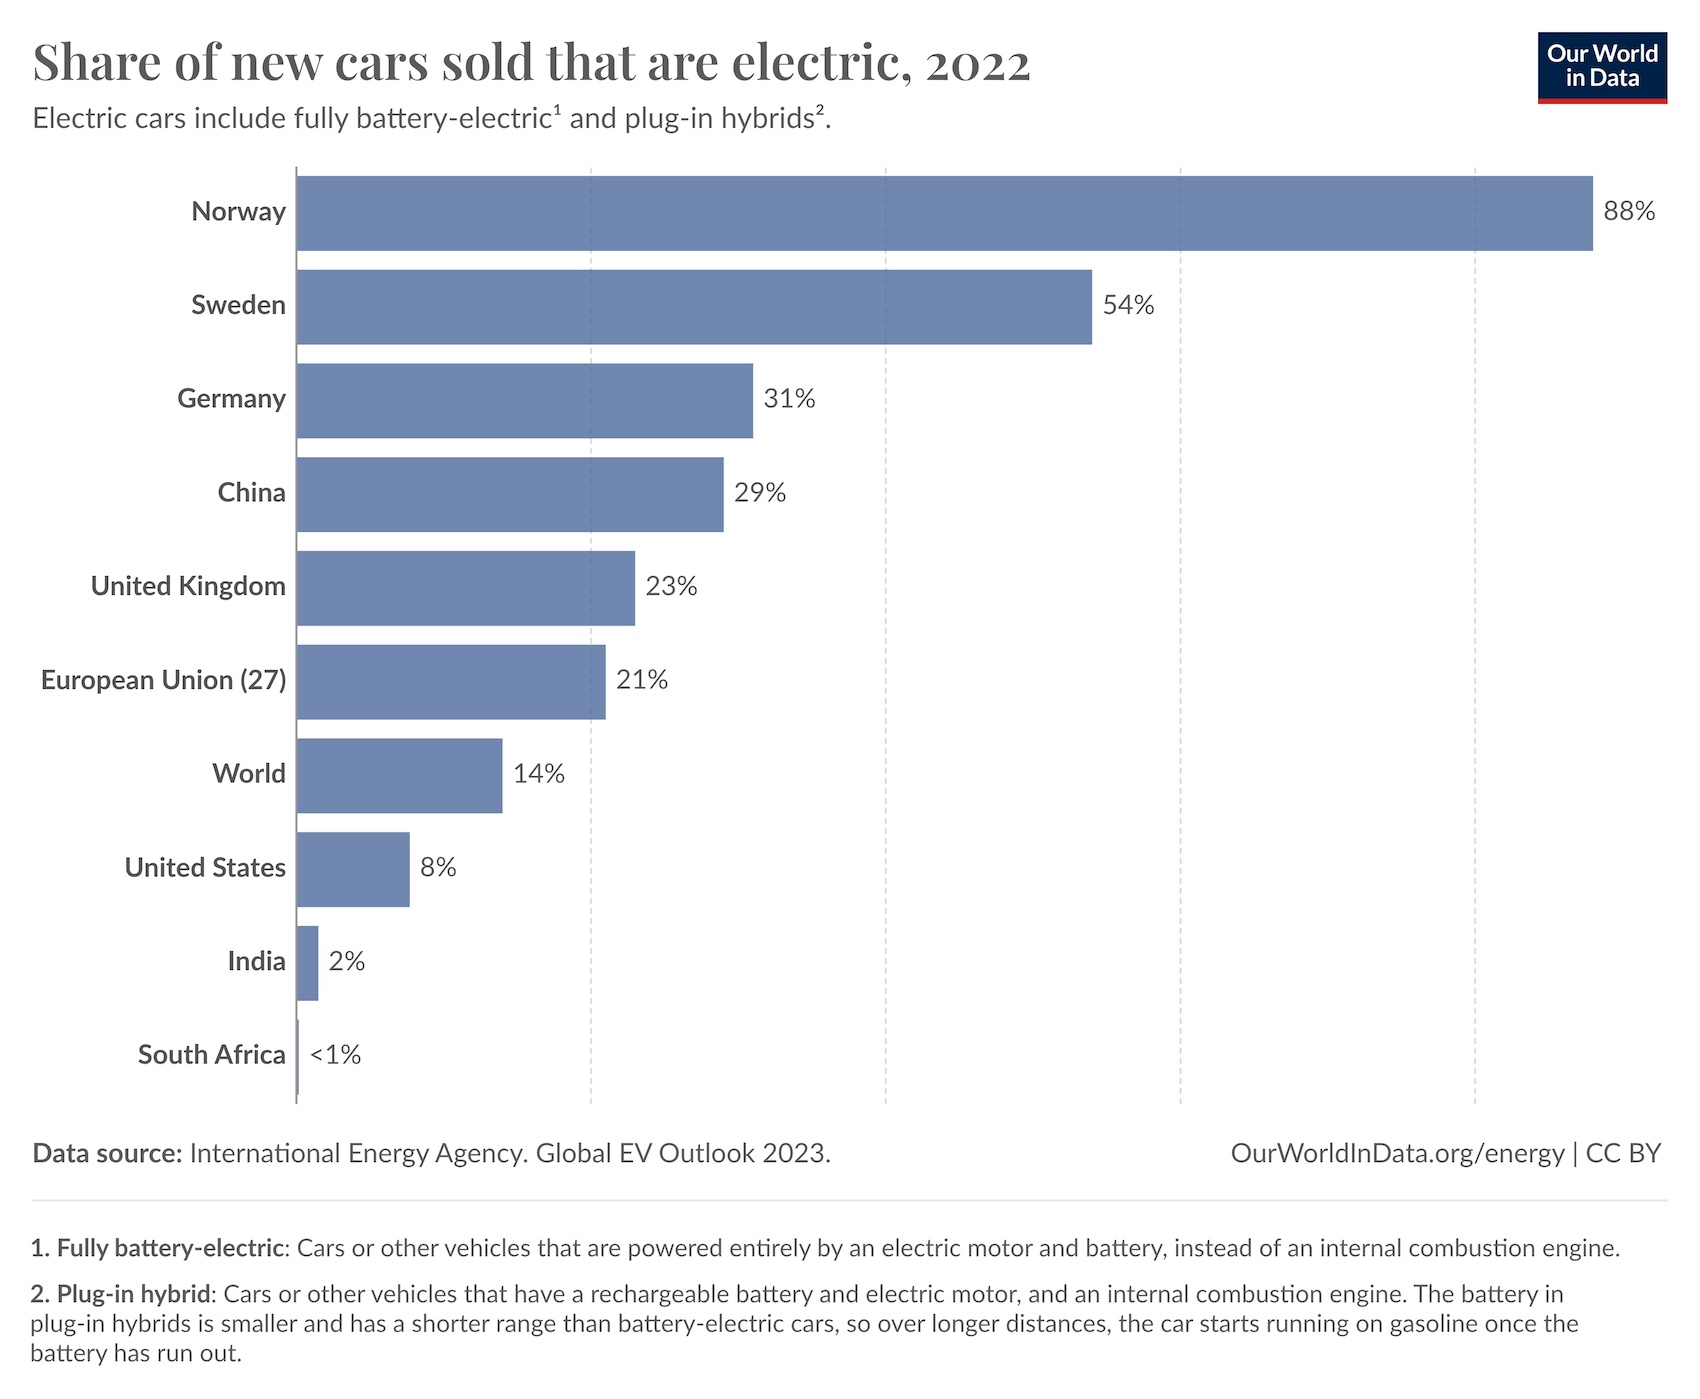 Graphical representation showing the percentage of new car sales that are electric, categorized by country or region, indicating a significant variation in electric vehicle adoption rates worldwide.